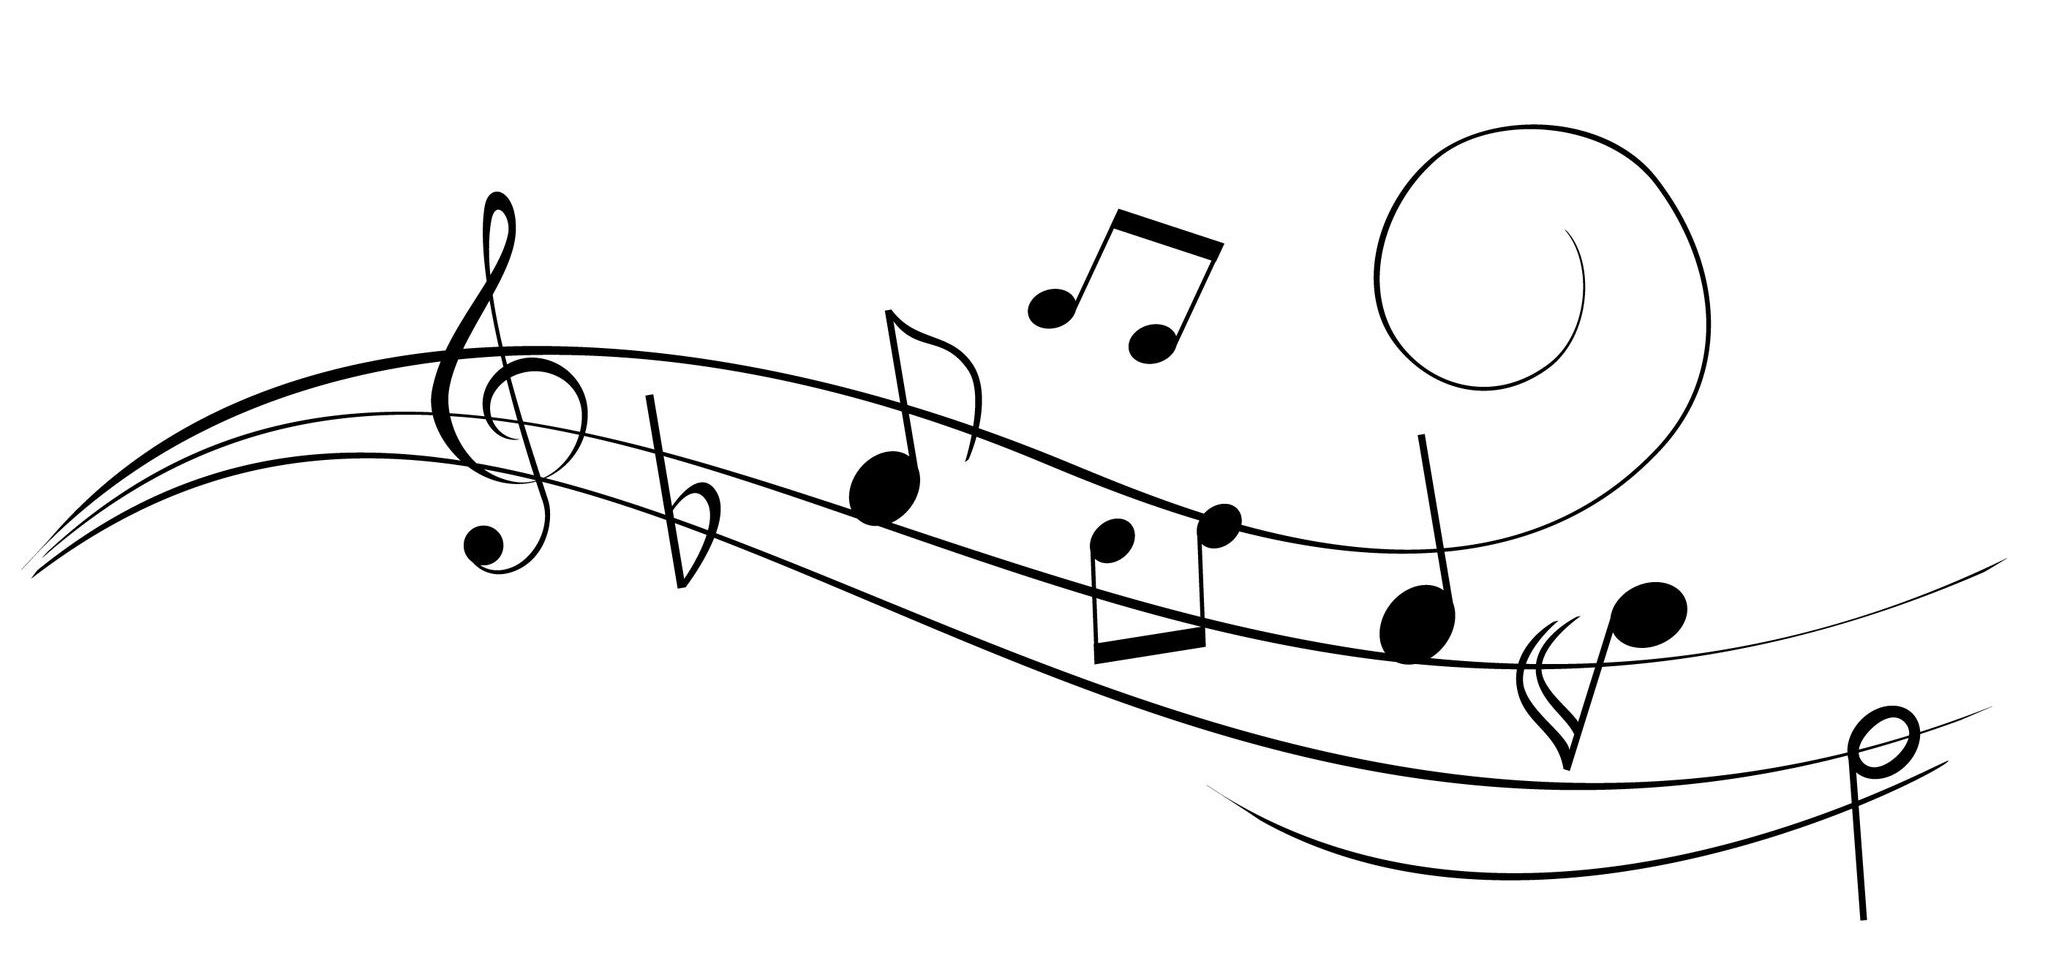 music-notes-1 Body-language and nonverbal communication